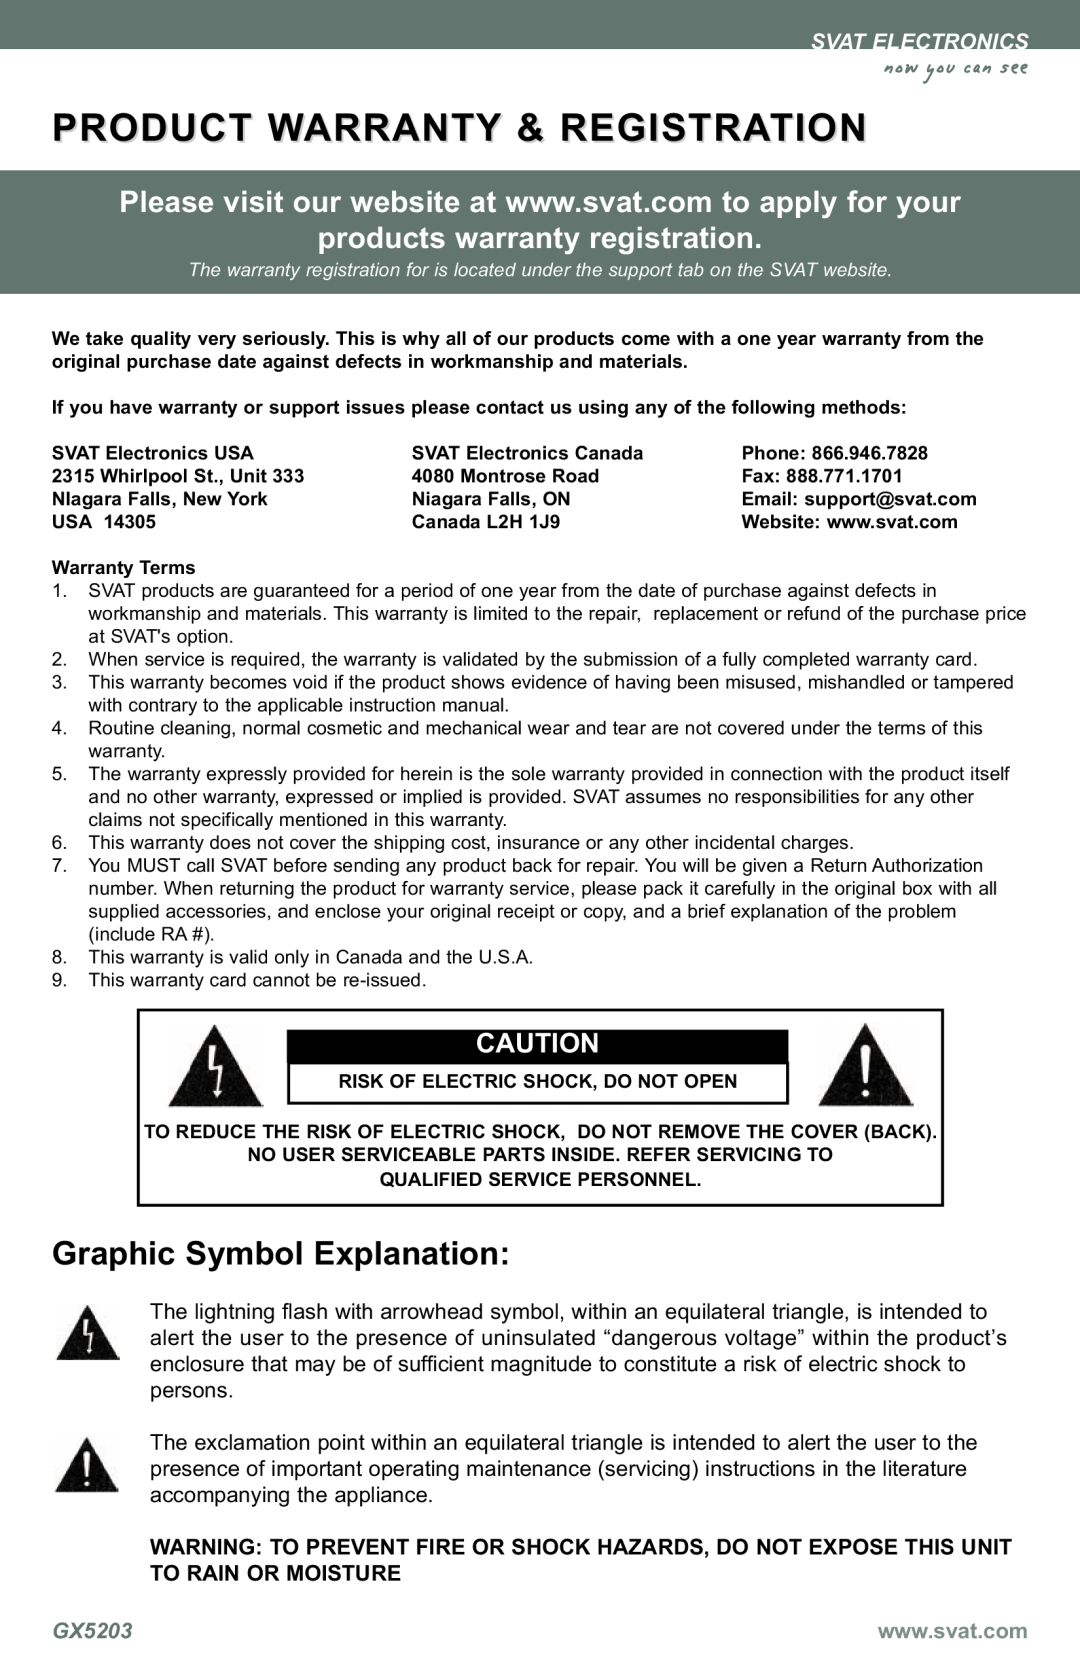 SVAT Electronics GX5203 PRODUCT WARRANTY & REGISTRATION now you can see, Graphic Symbol Explanation, Svat Electronics 